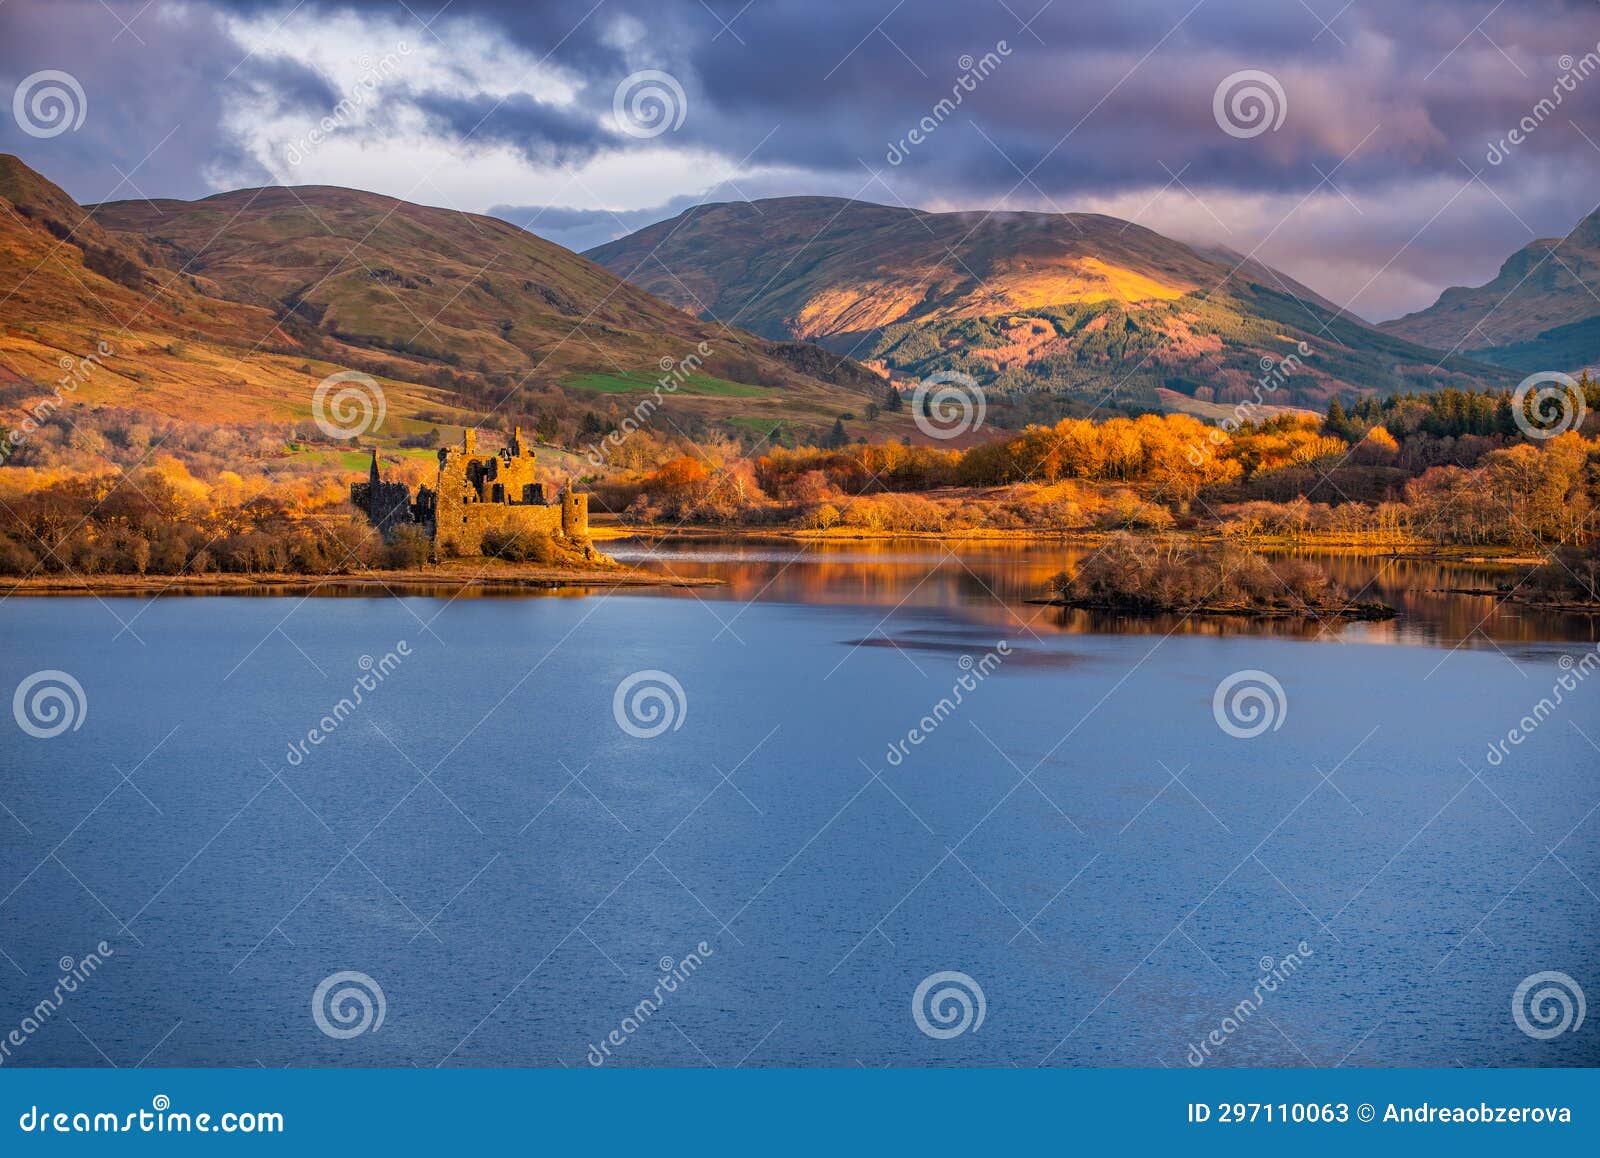 the ruin of kilchurn castle, highland mountains and loch awe, scotland.